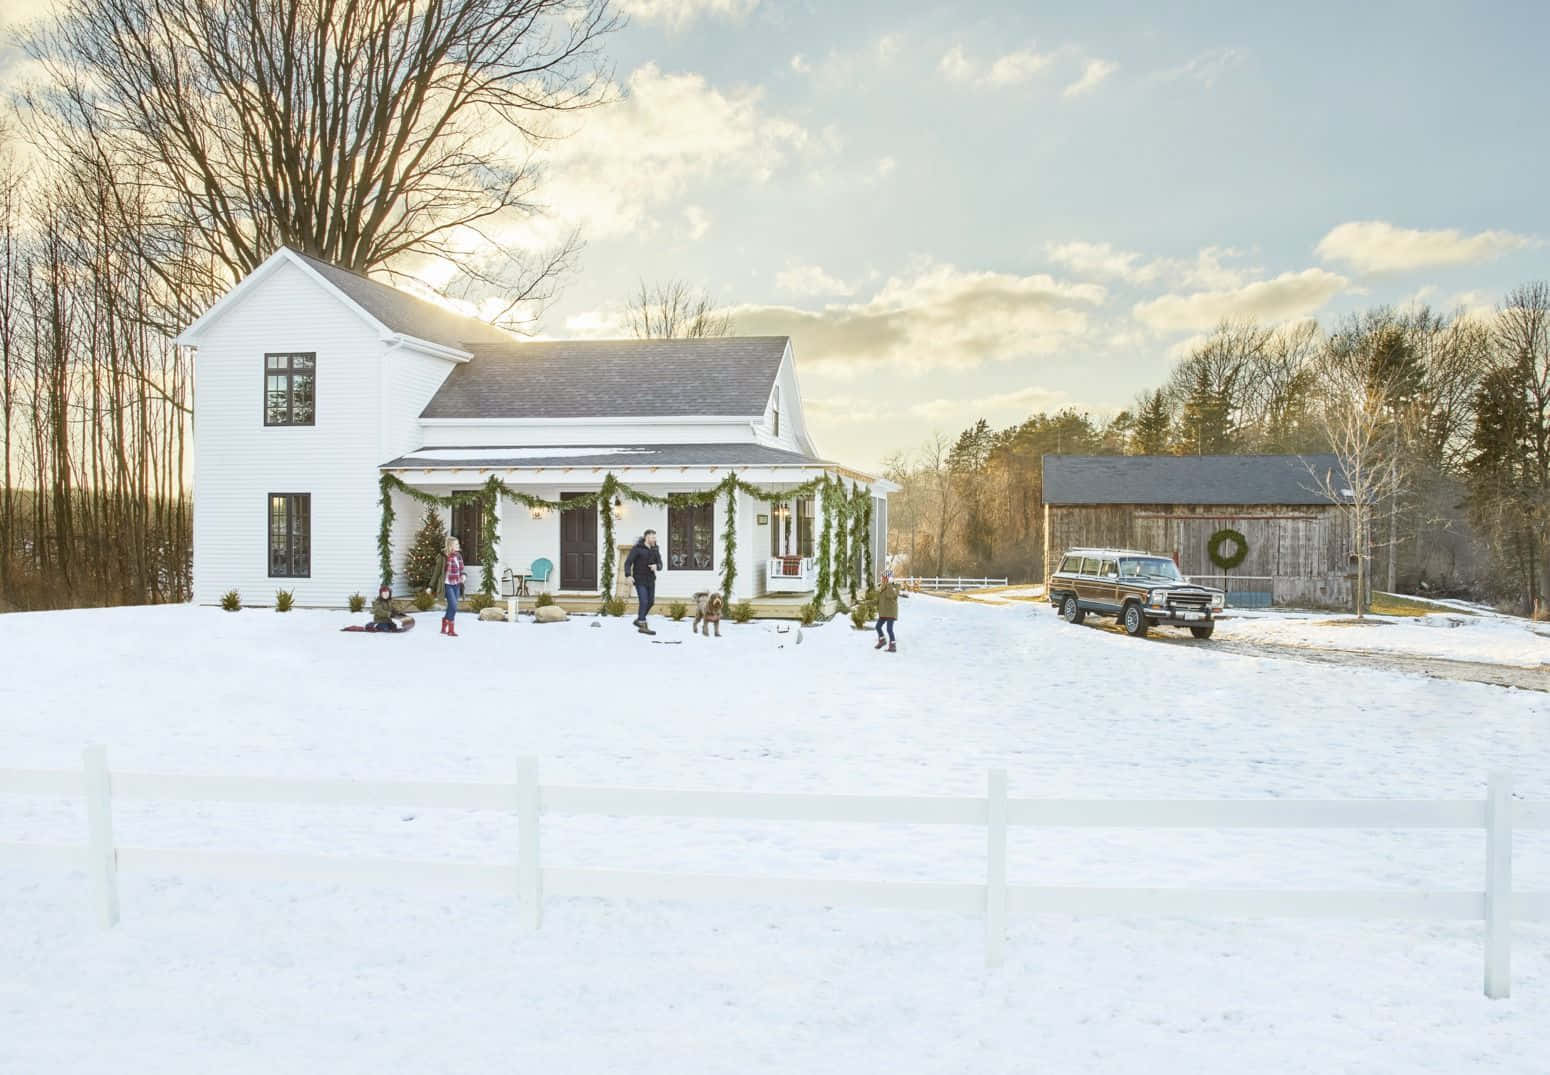 A White Farmhouse With A Snow Covered Yard Wallpaper